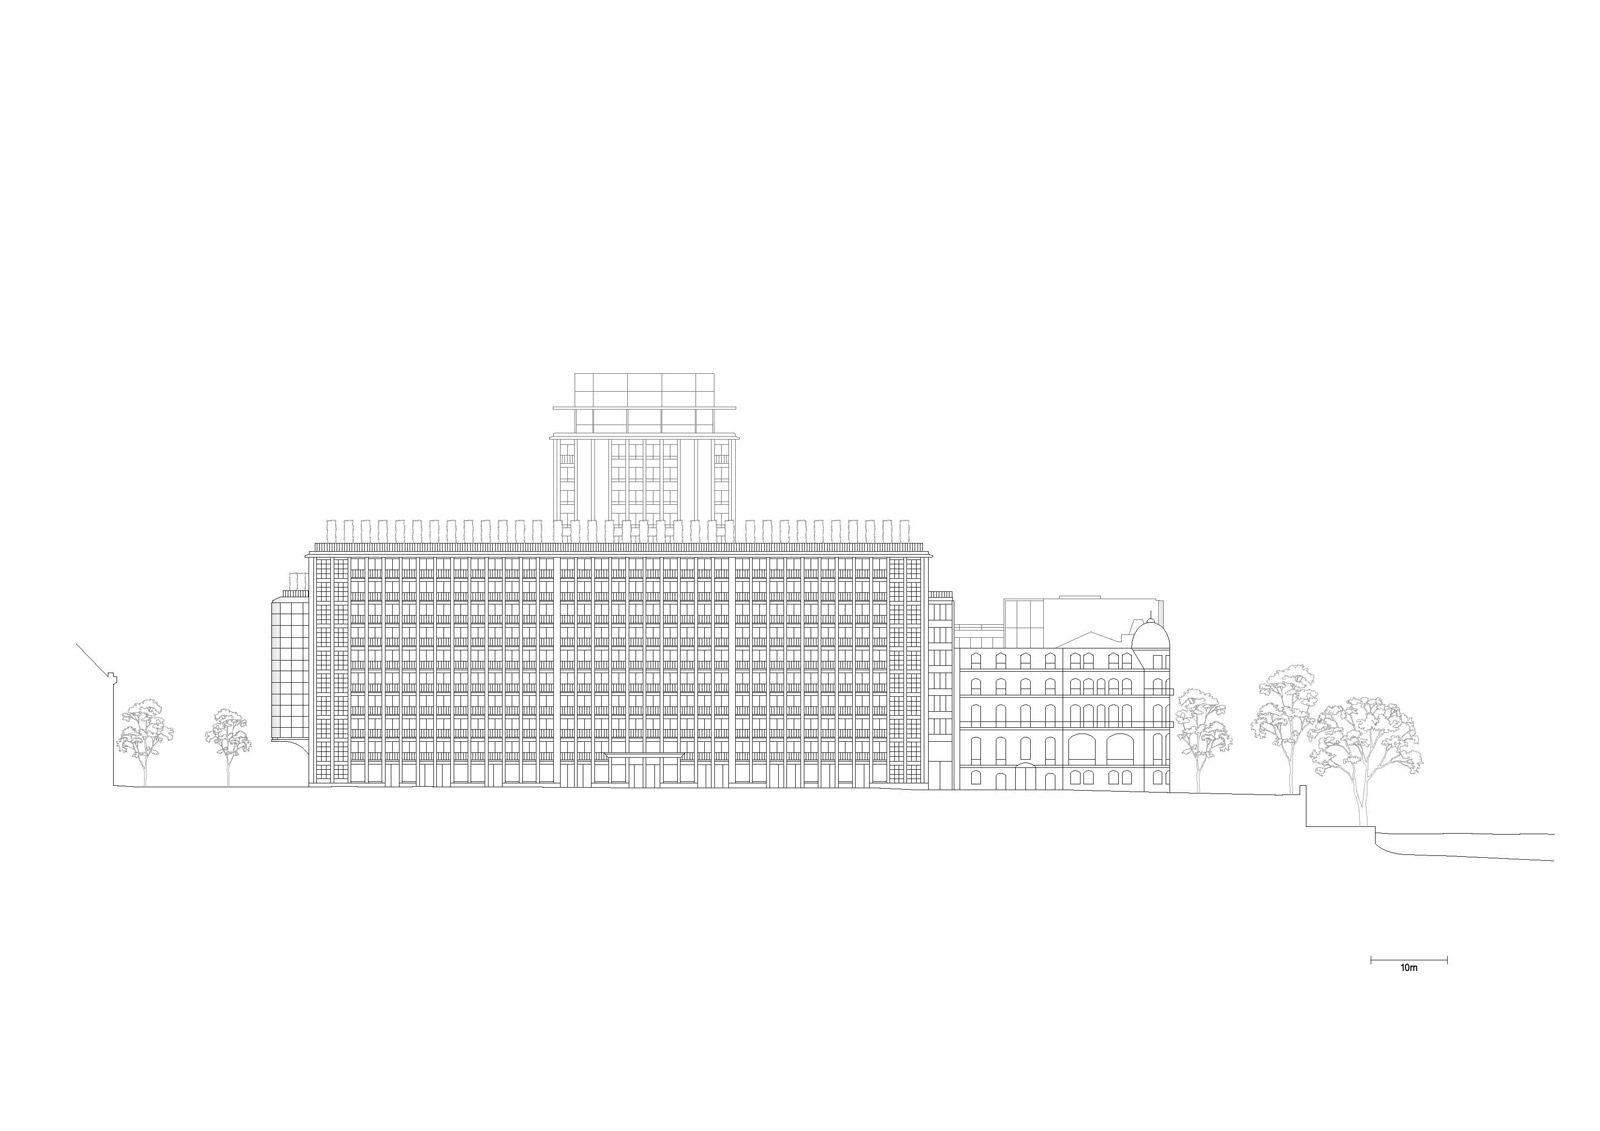 Image of 20220913 Chipperfield MorlandMixiteCapitale 20 in Morland Mixité Capitale - Cosentino